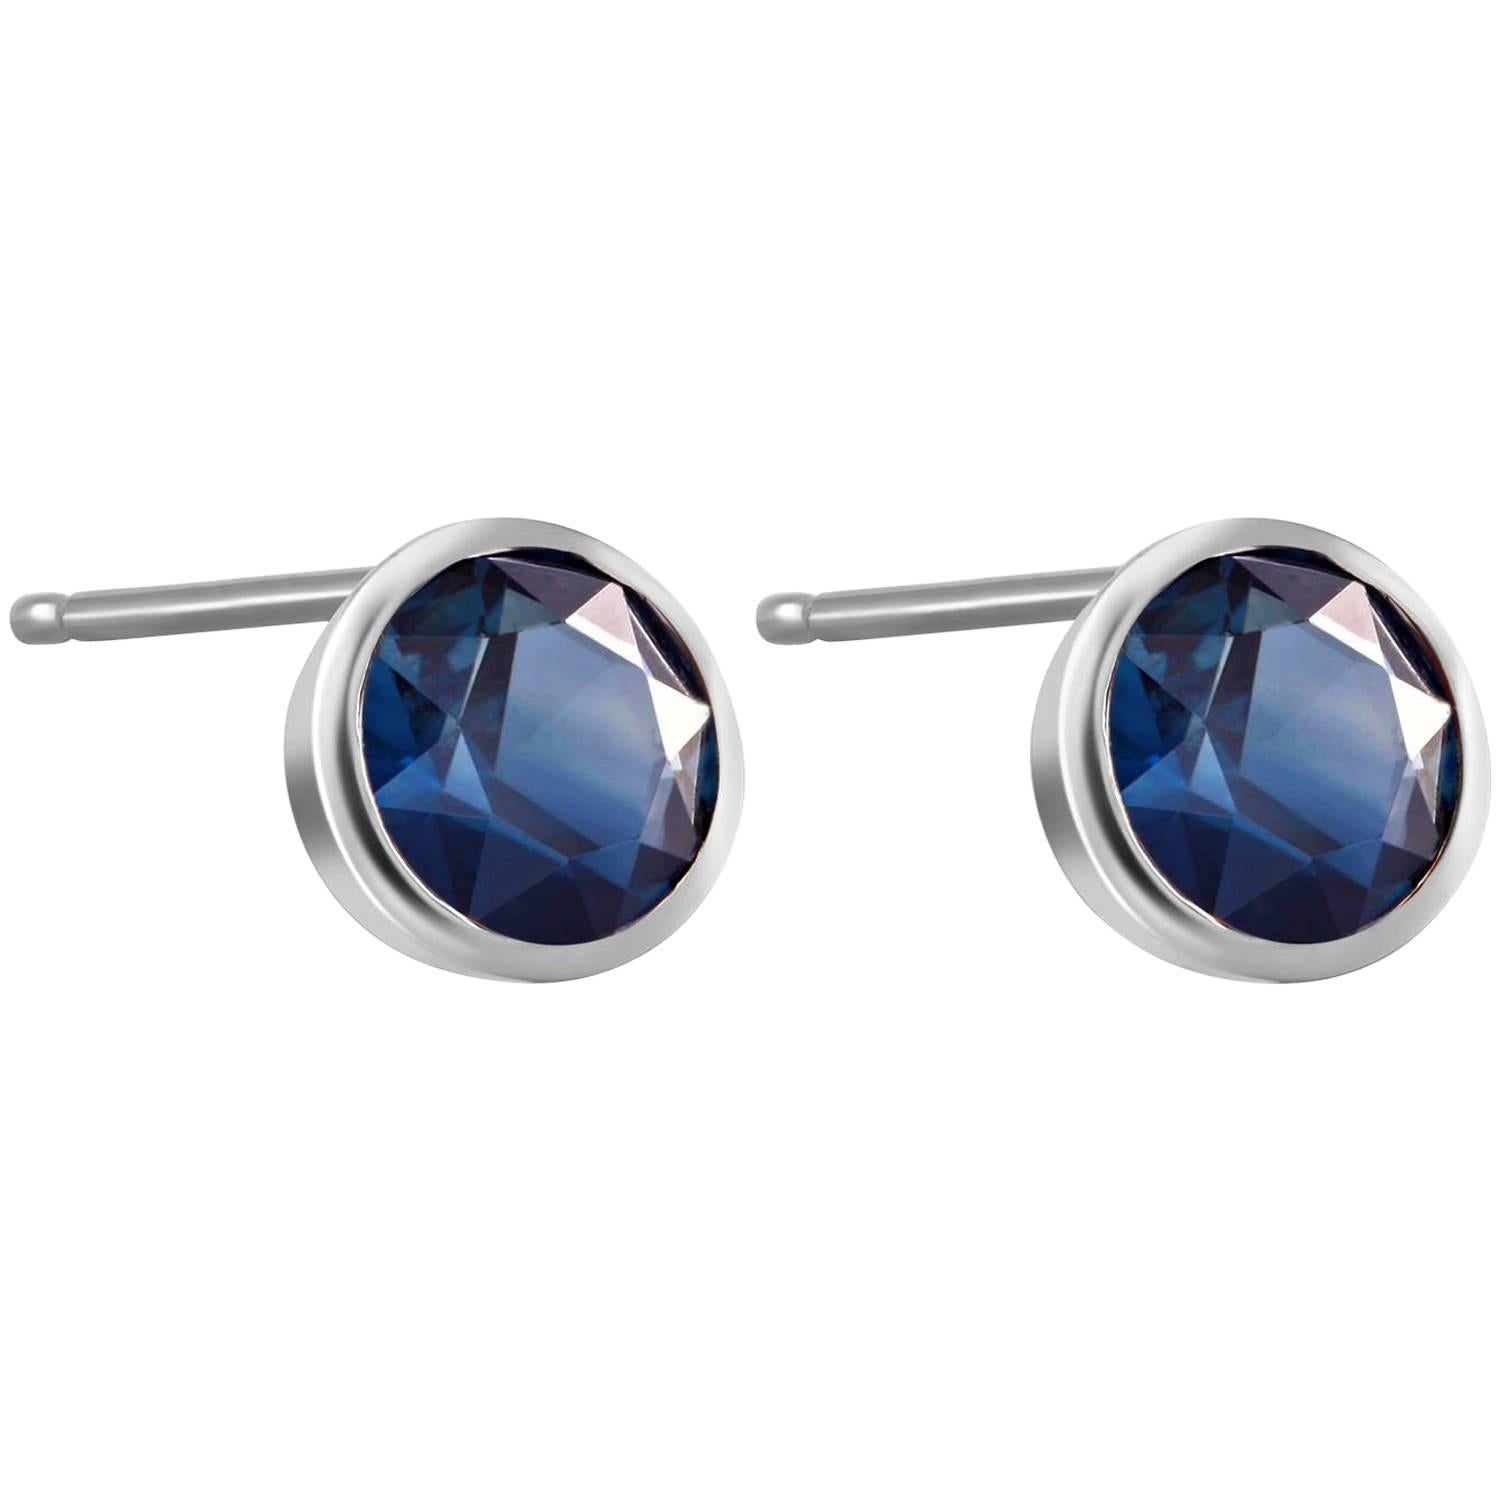 White Gold Bezel Set Stud Earrings with Pair Sapphire Weighing 1.60 Carat 